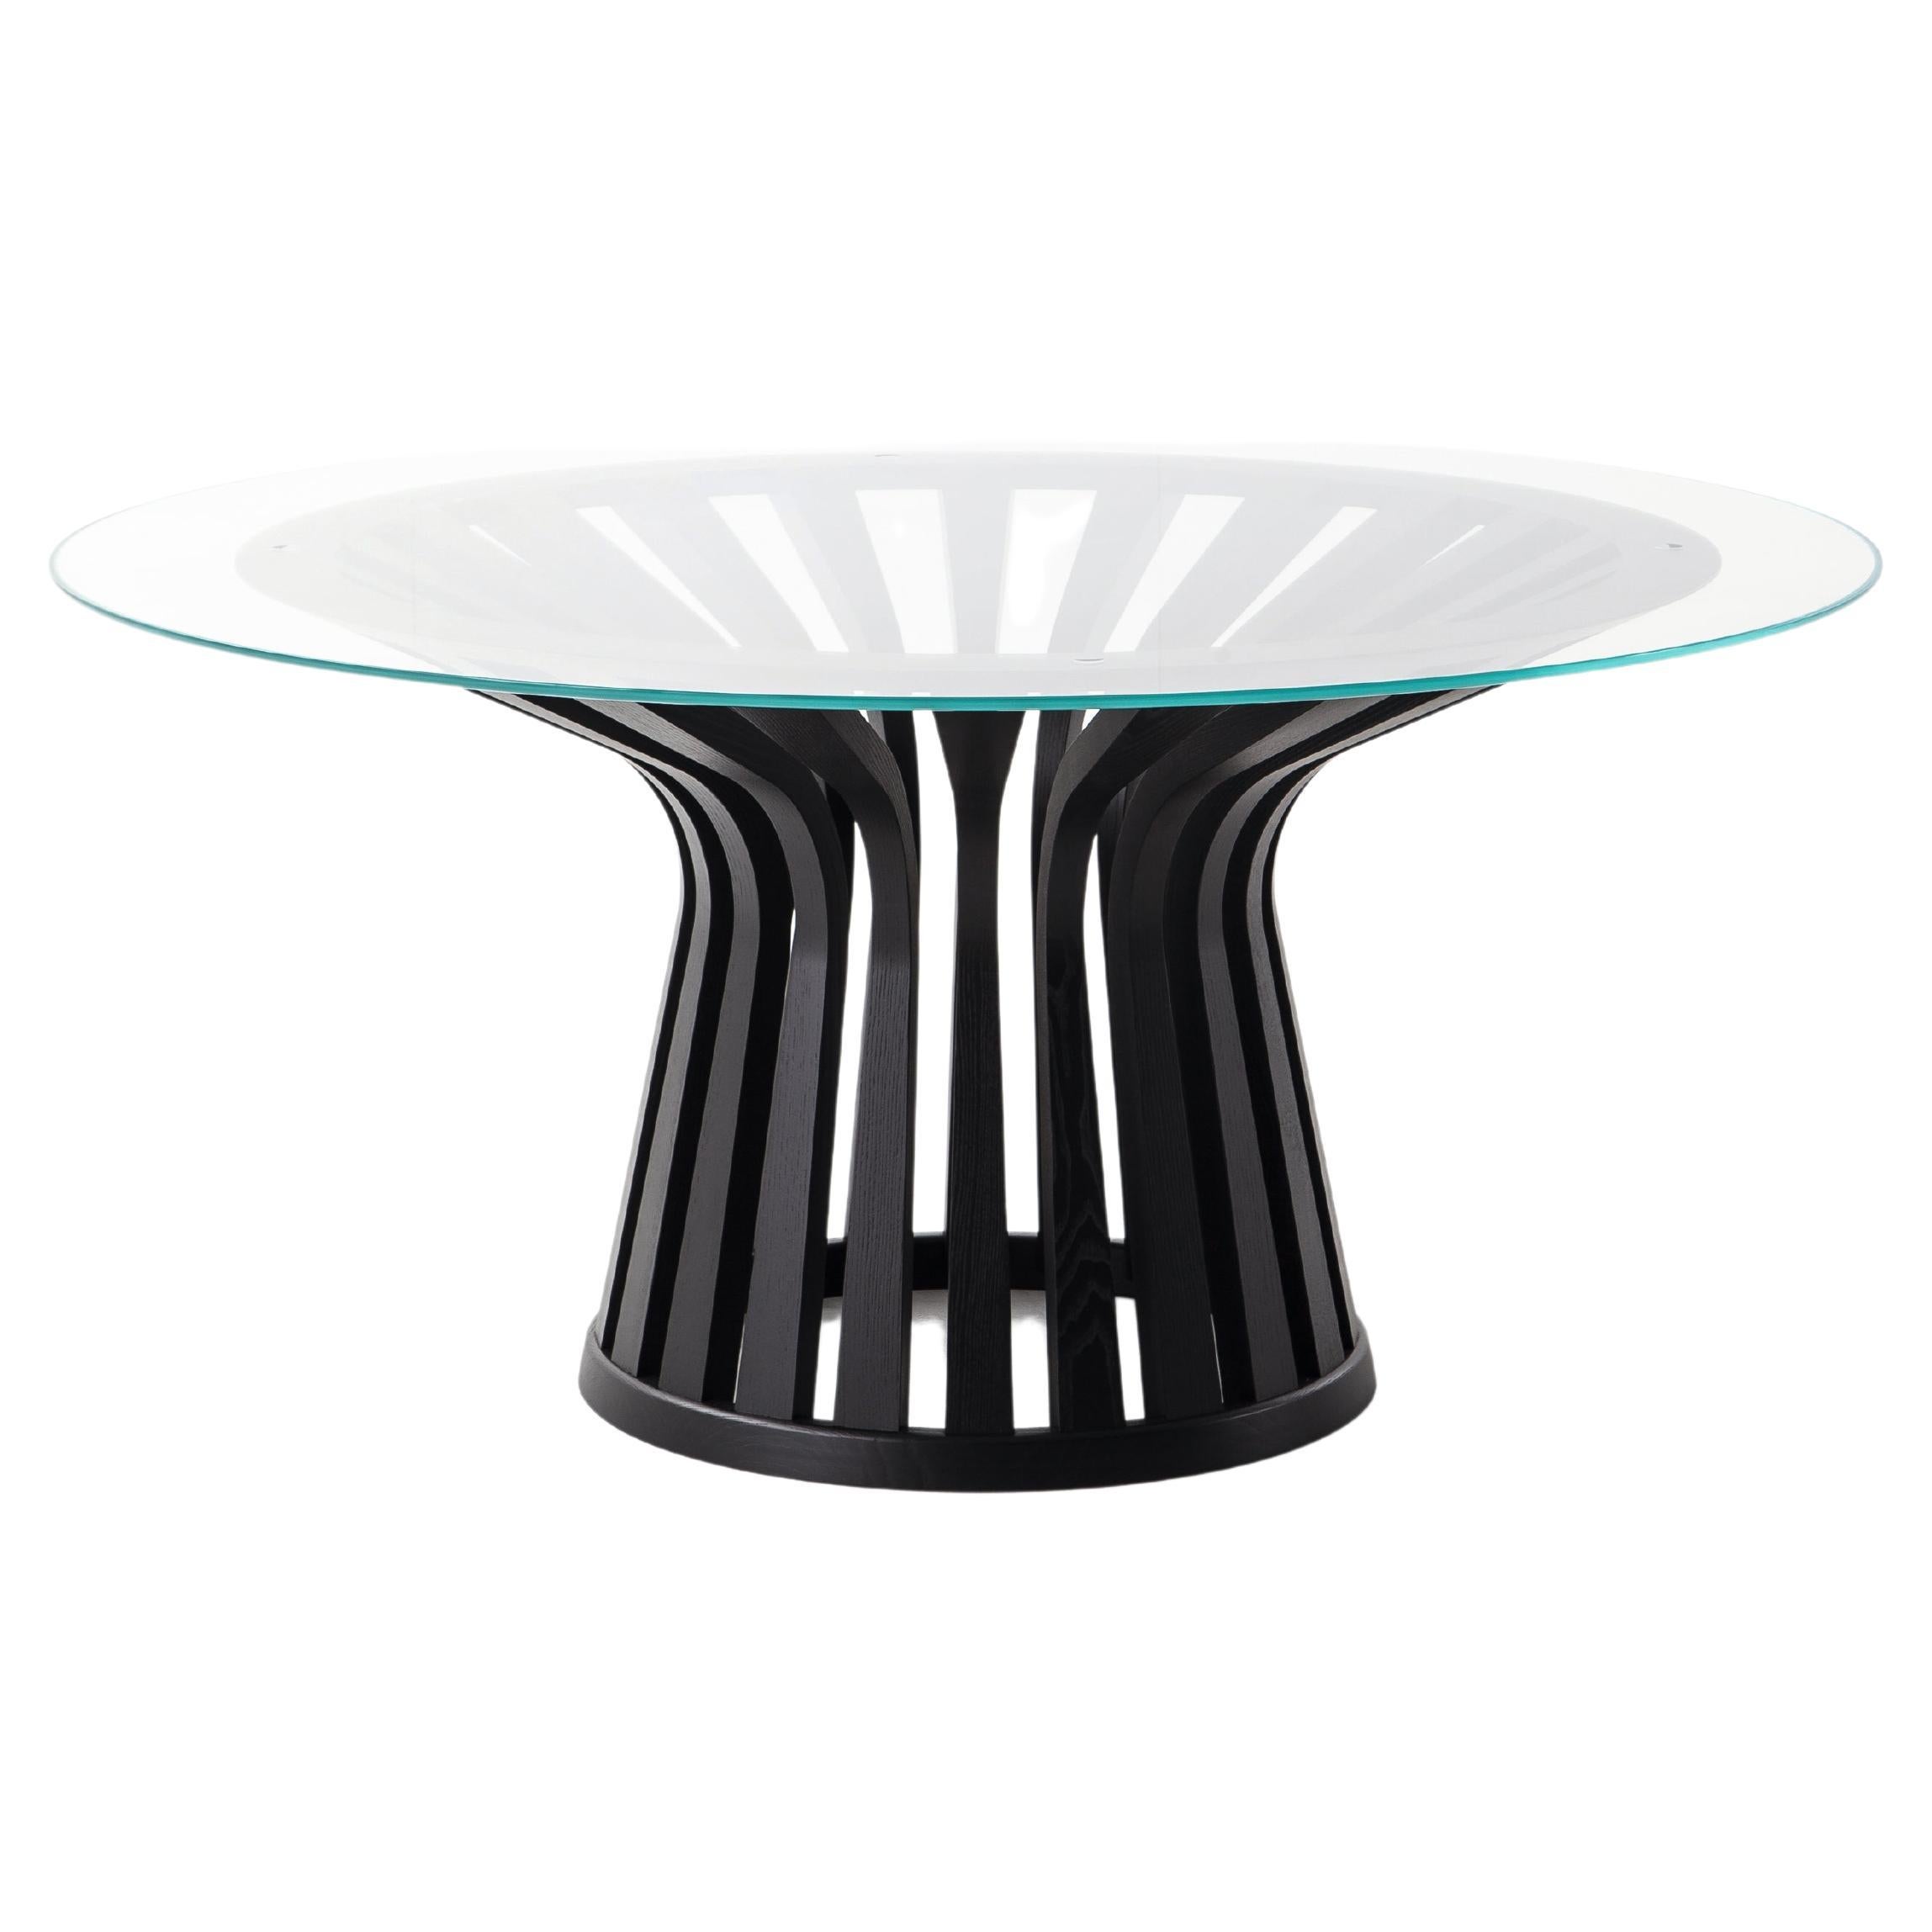 Lebeau Wood and Glass Table by Patrick Jouin For Sale